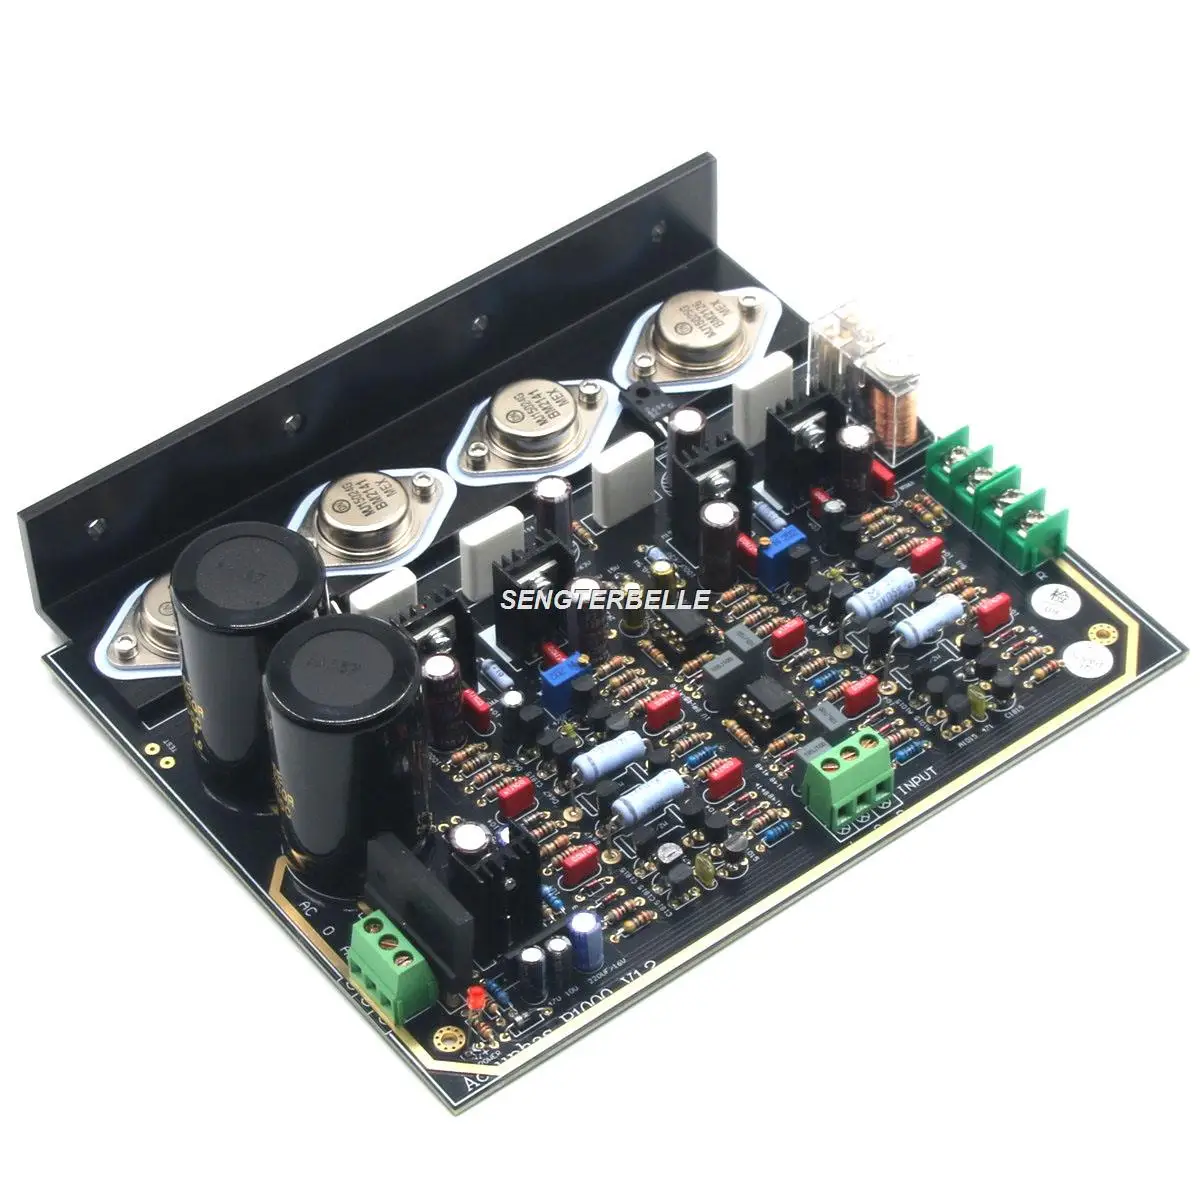 

HiFi 200W Stereo MJ15024 MJ15025 Power Amplifier Board Reference Accuphase Circuit